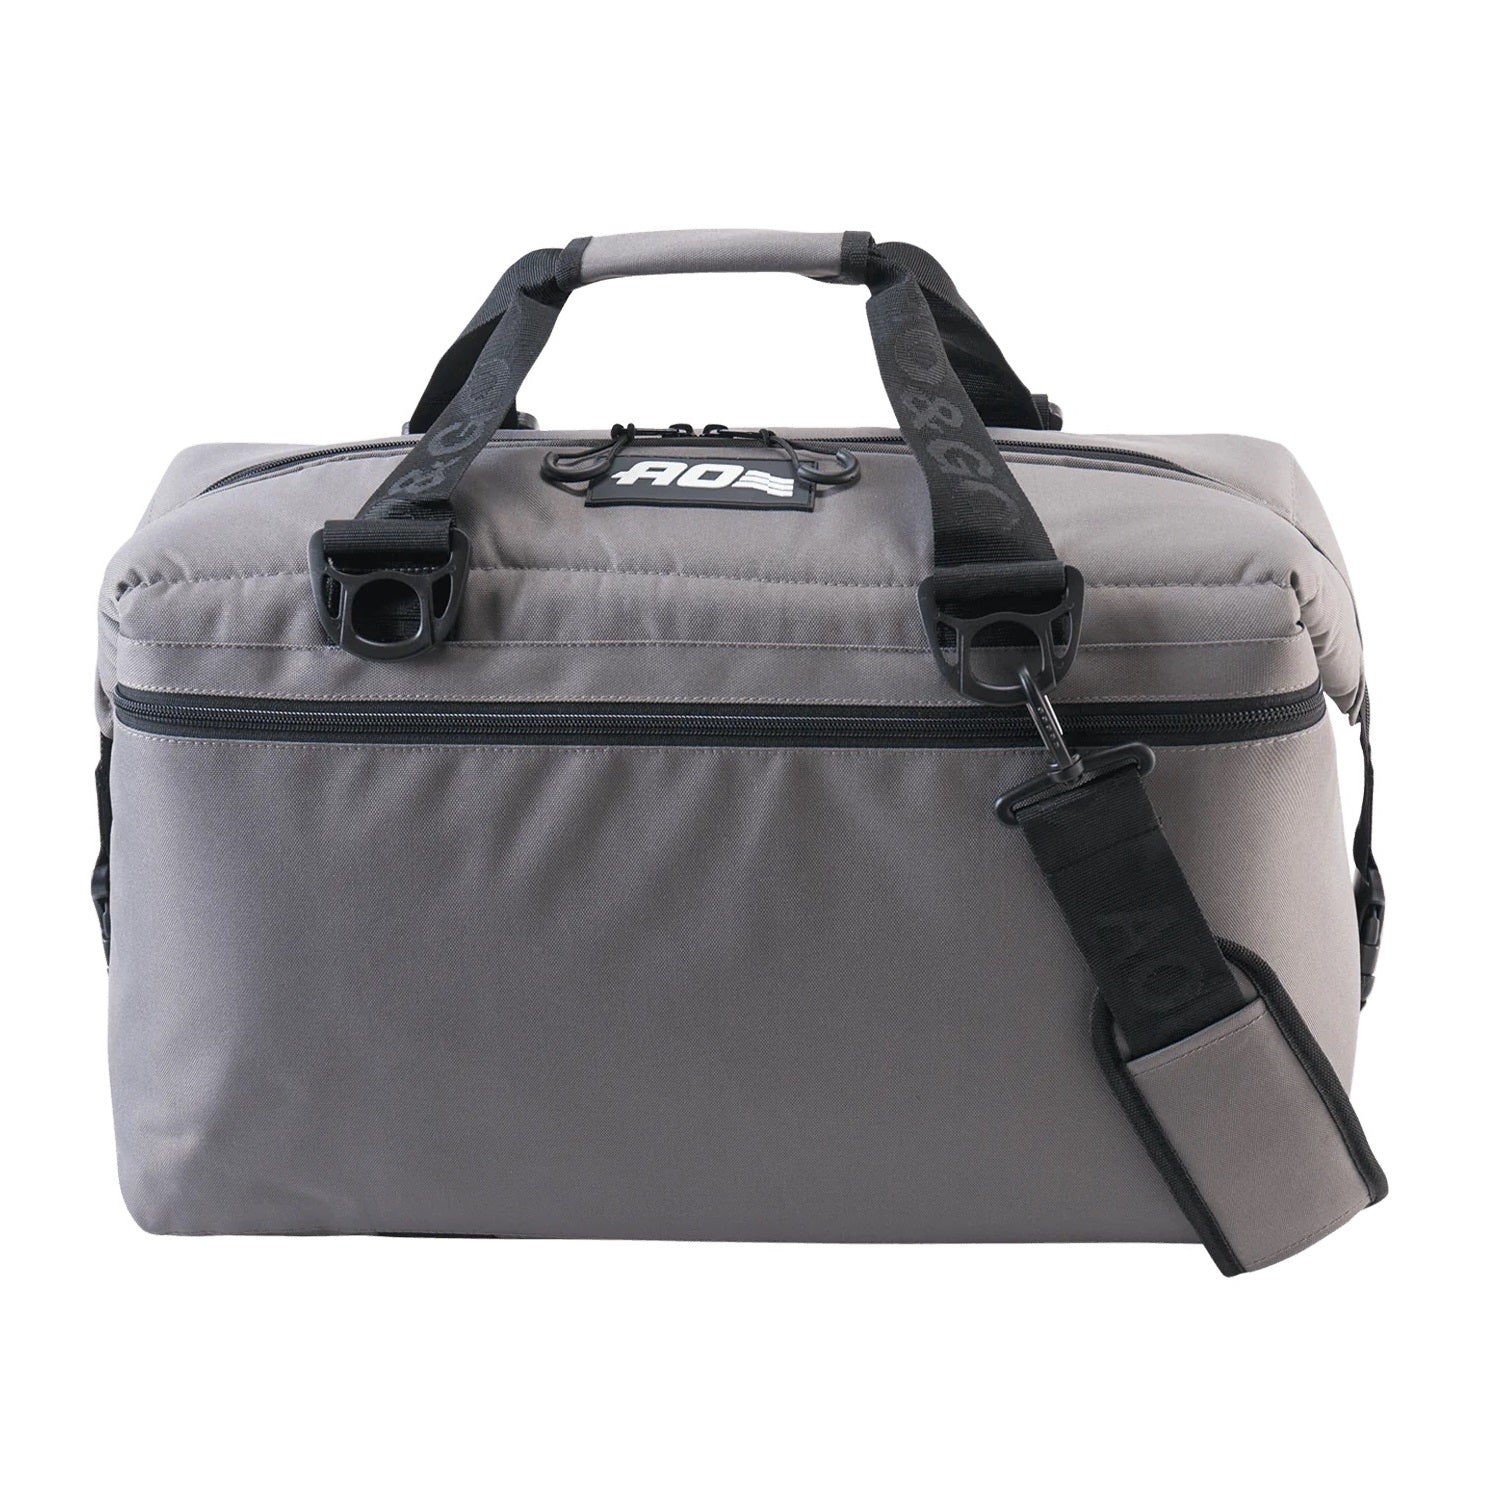 Canvas Series 36 Pack Cooler AO36